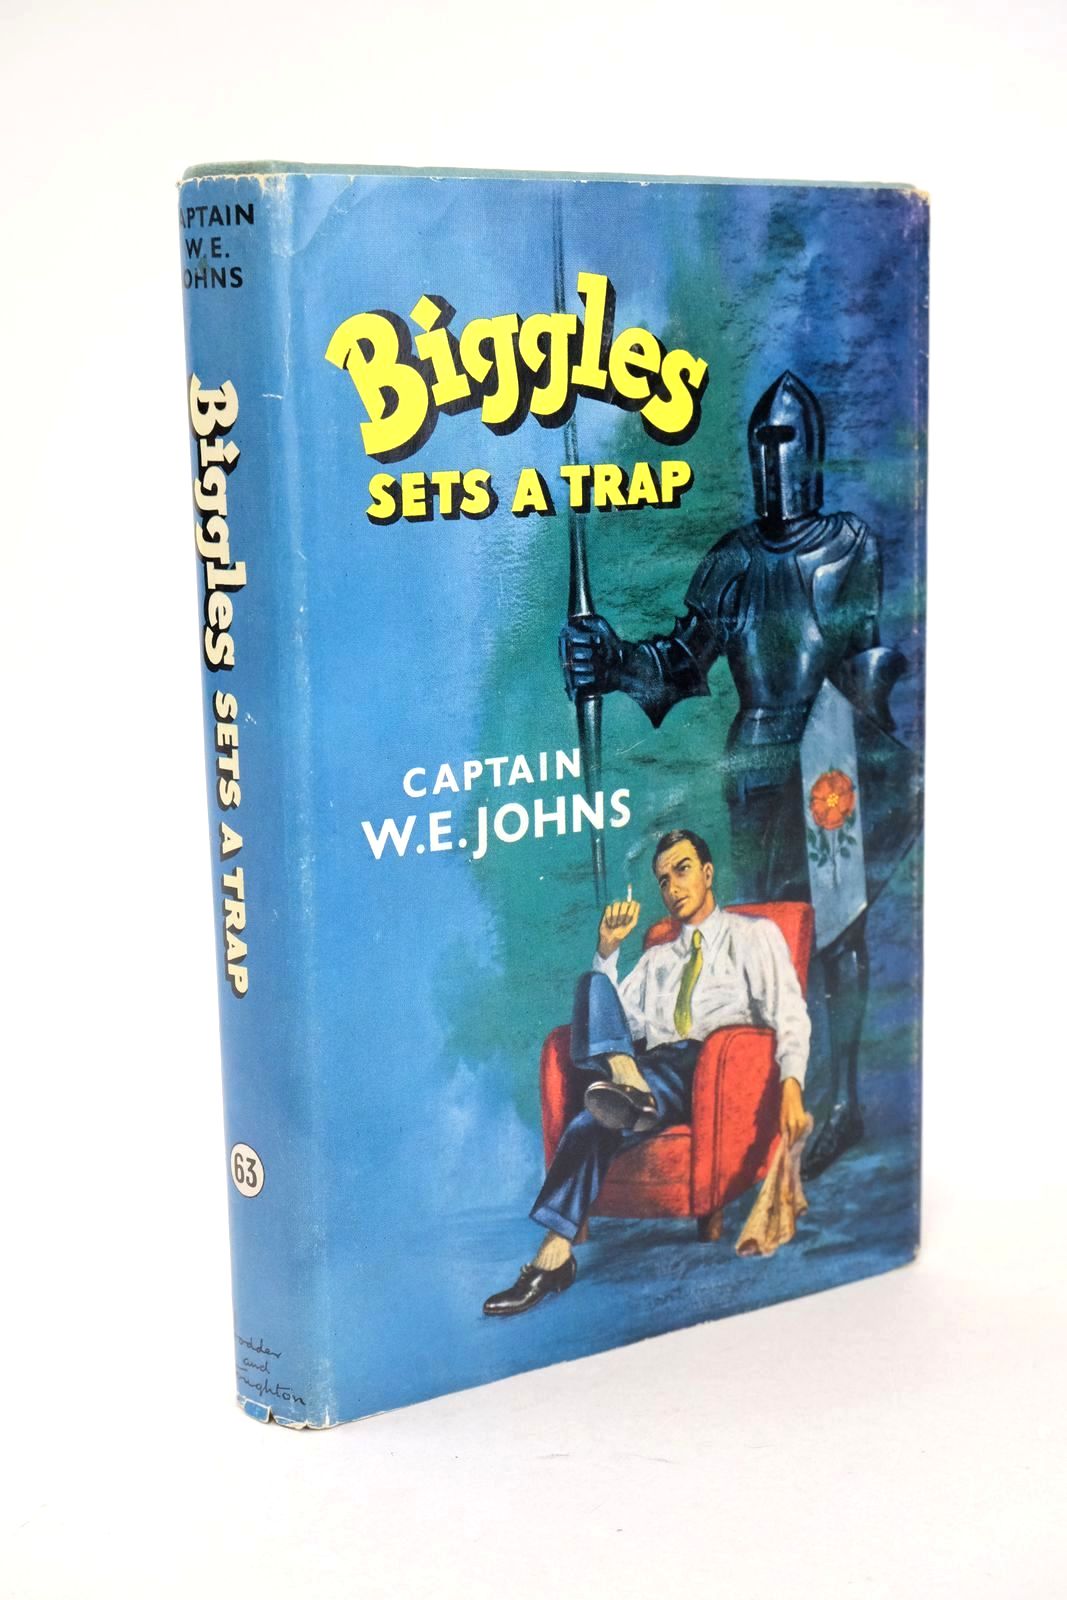 Photo of BIGGLES SETS A TRAP written by Johns, W.E. illustrated by Stead,  published by Hodder & Stoughton (STOCK CODE: 1326015)  for sale by Stella & Rose's Books